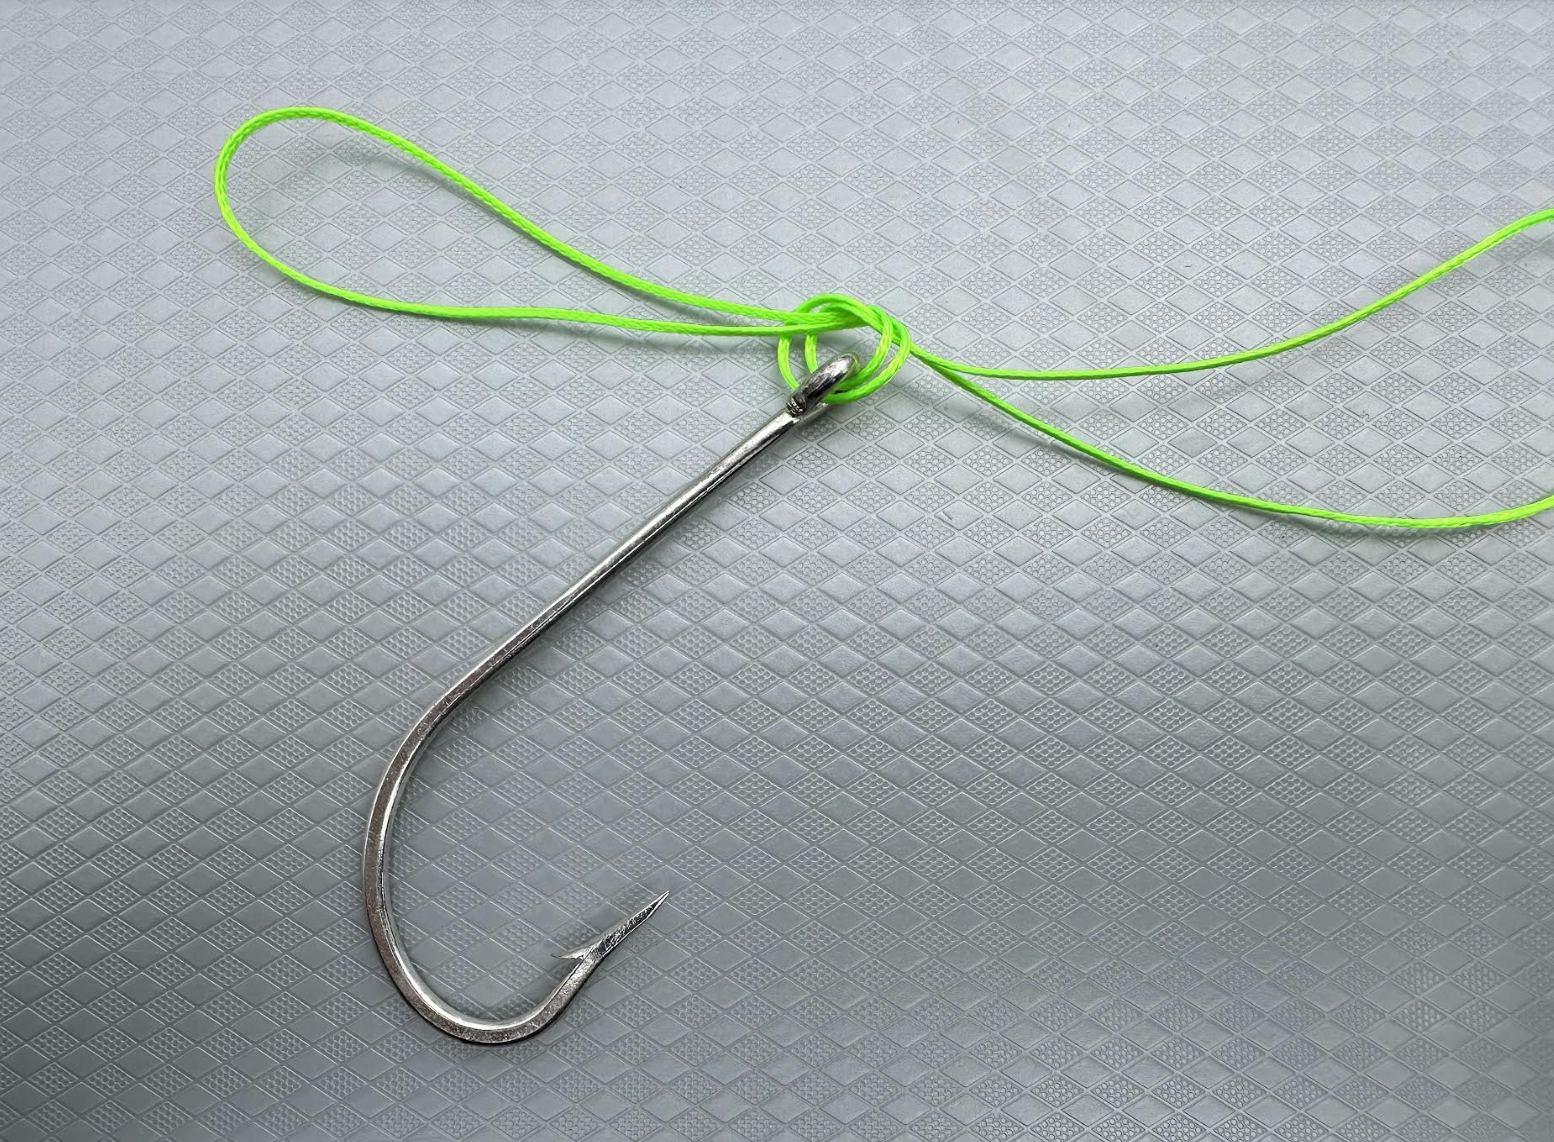 3-Minute Hacks - How to tie a strong knot in 3 steps.